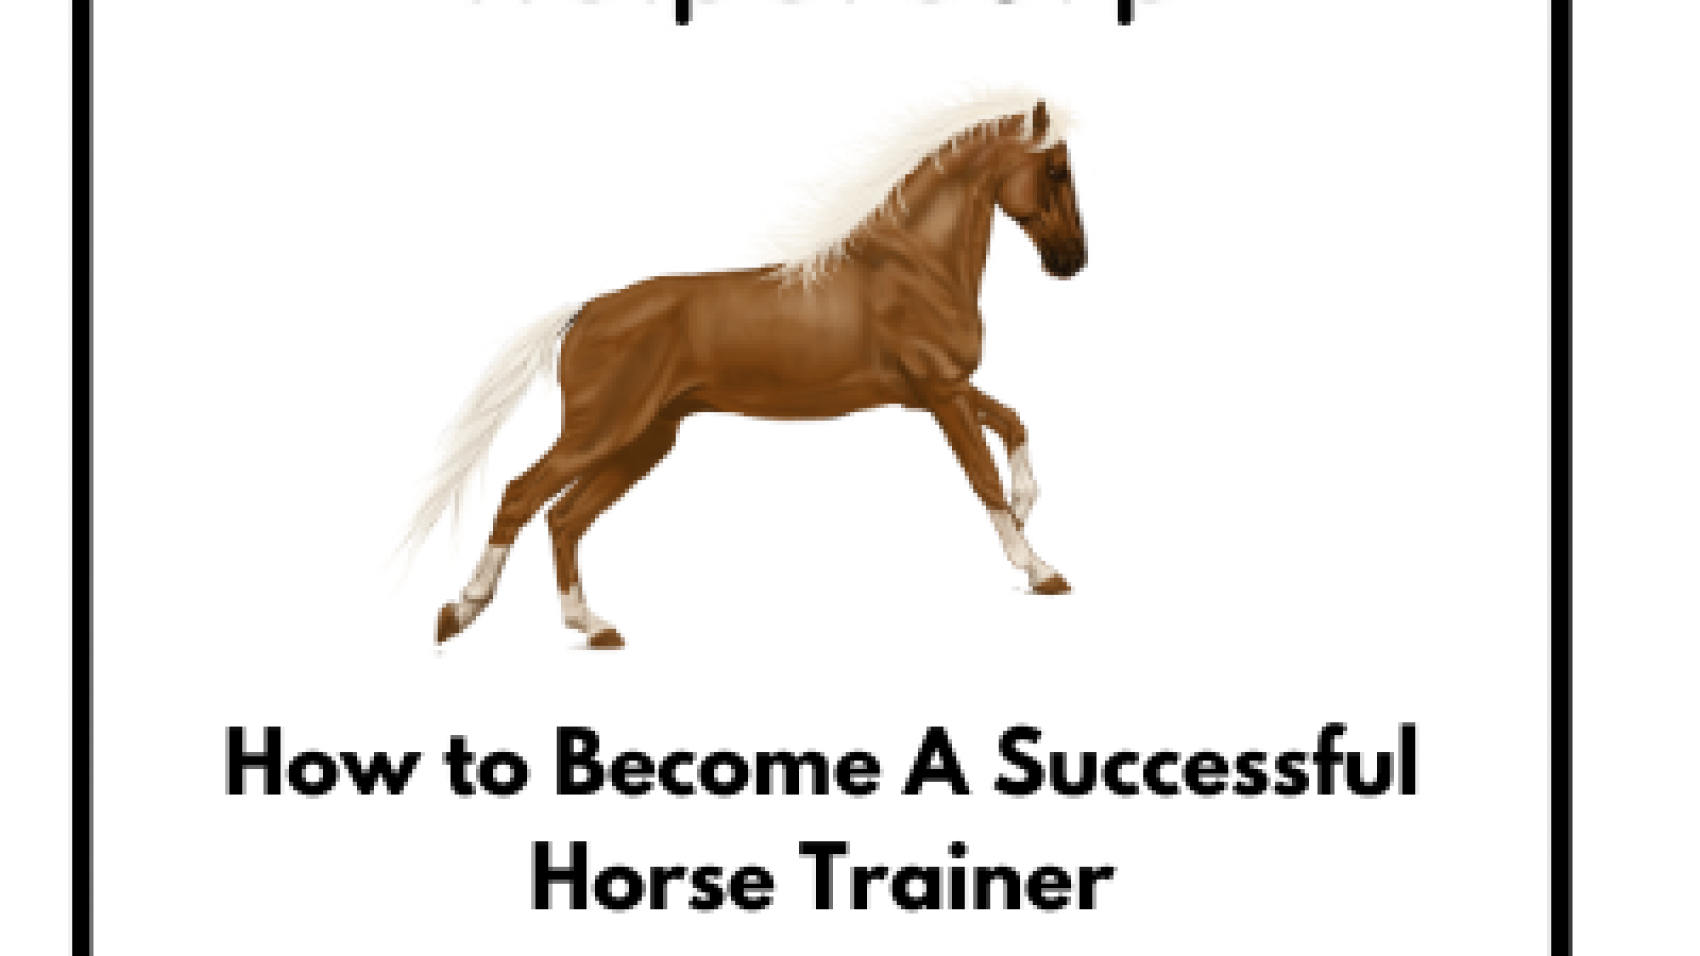 How-to-Become-A-Successful-Horse-Trainer